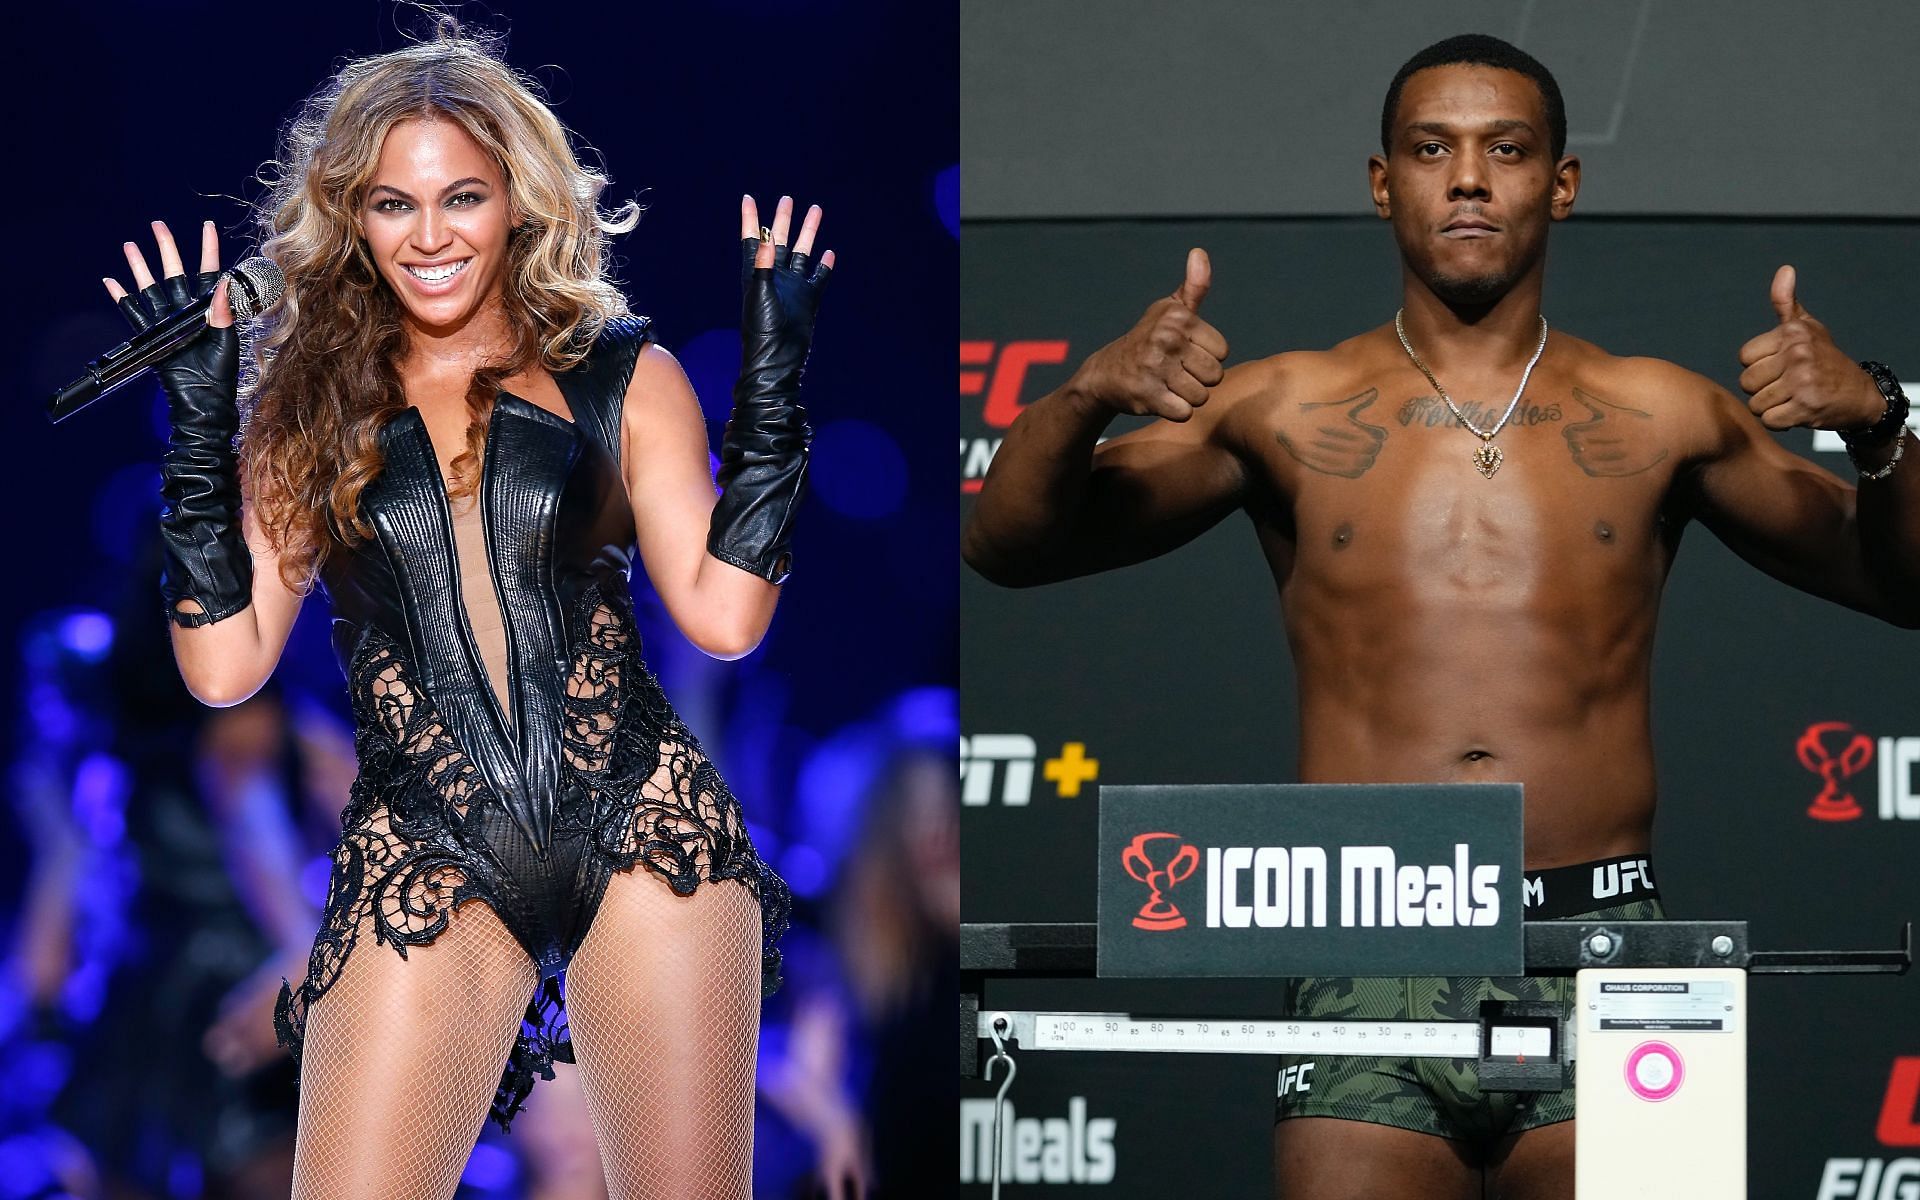 Beyonce (left) and Jamahal Hill (right) [Image Courtesy: Getty Images]